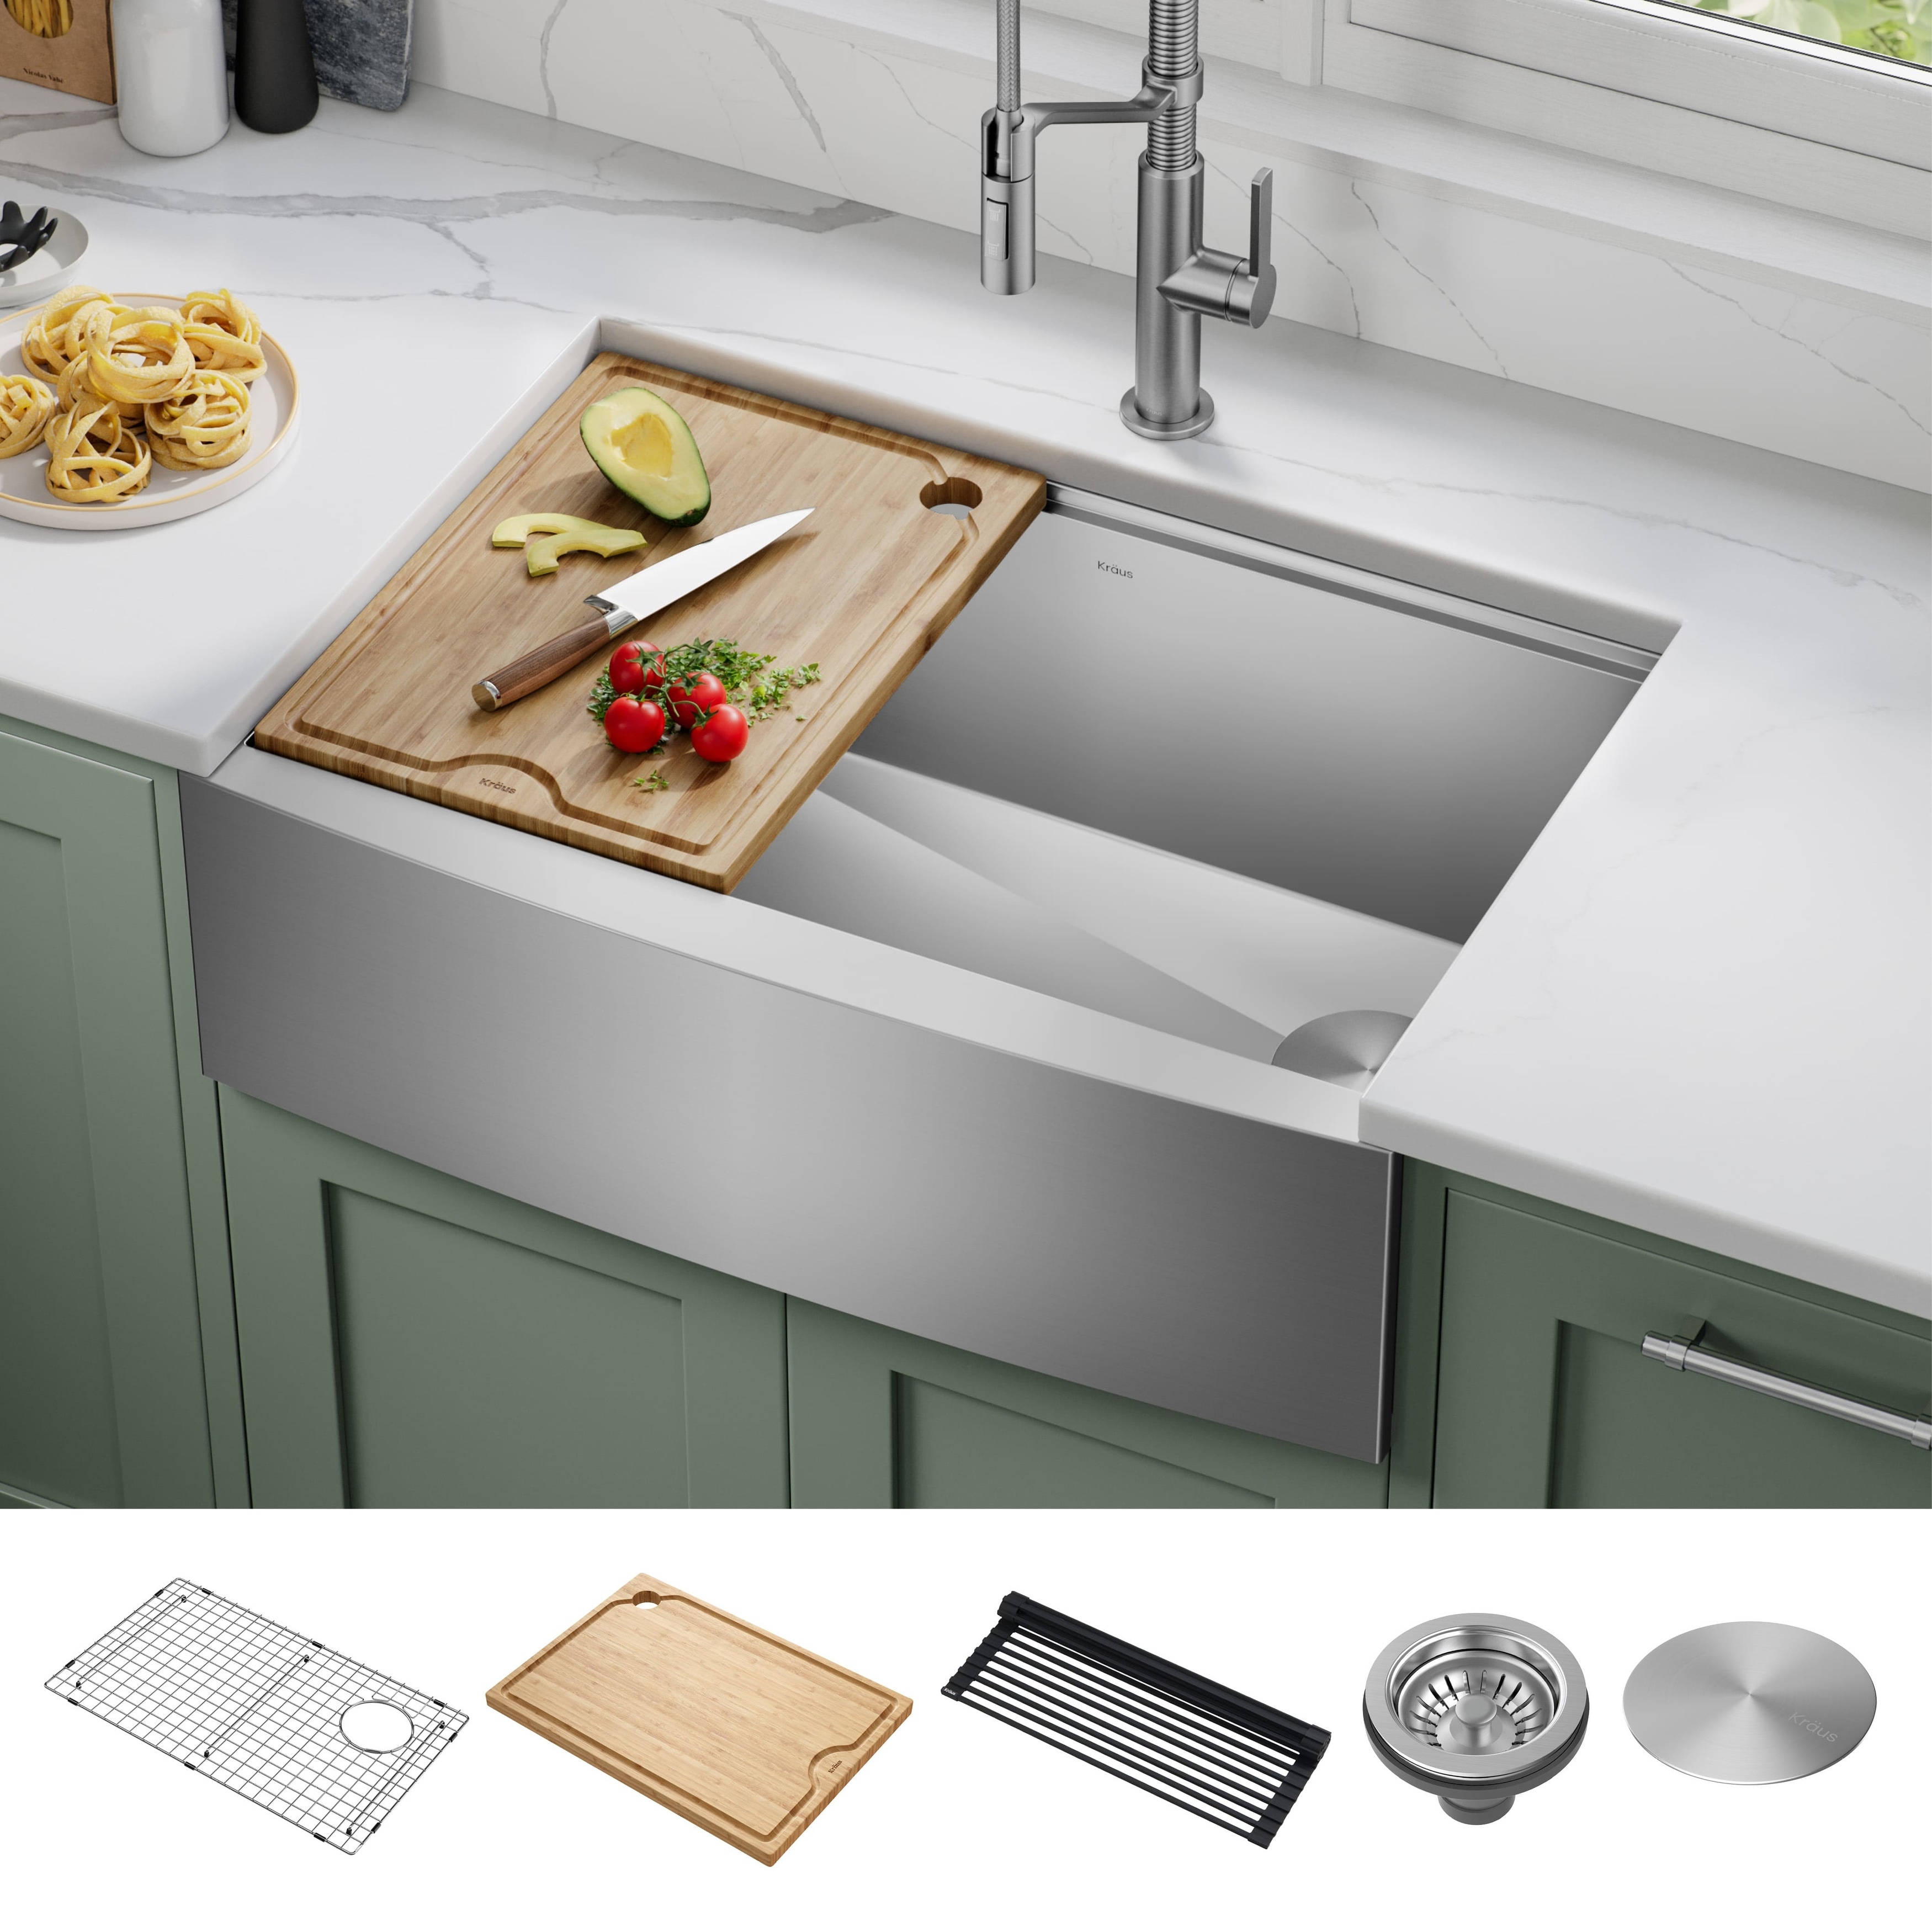 https://ak1.ostkcdn.com/images/products/is/images/direct/9adab0994cbc22d93ae4ea2e9f3fa1a295326825/KRAUS-Kore-Workstation-Farmhouse-Apron-Stainless-Steel-Kitchen-Sink.jpg